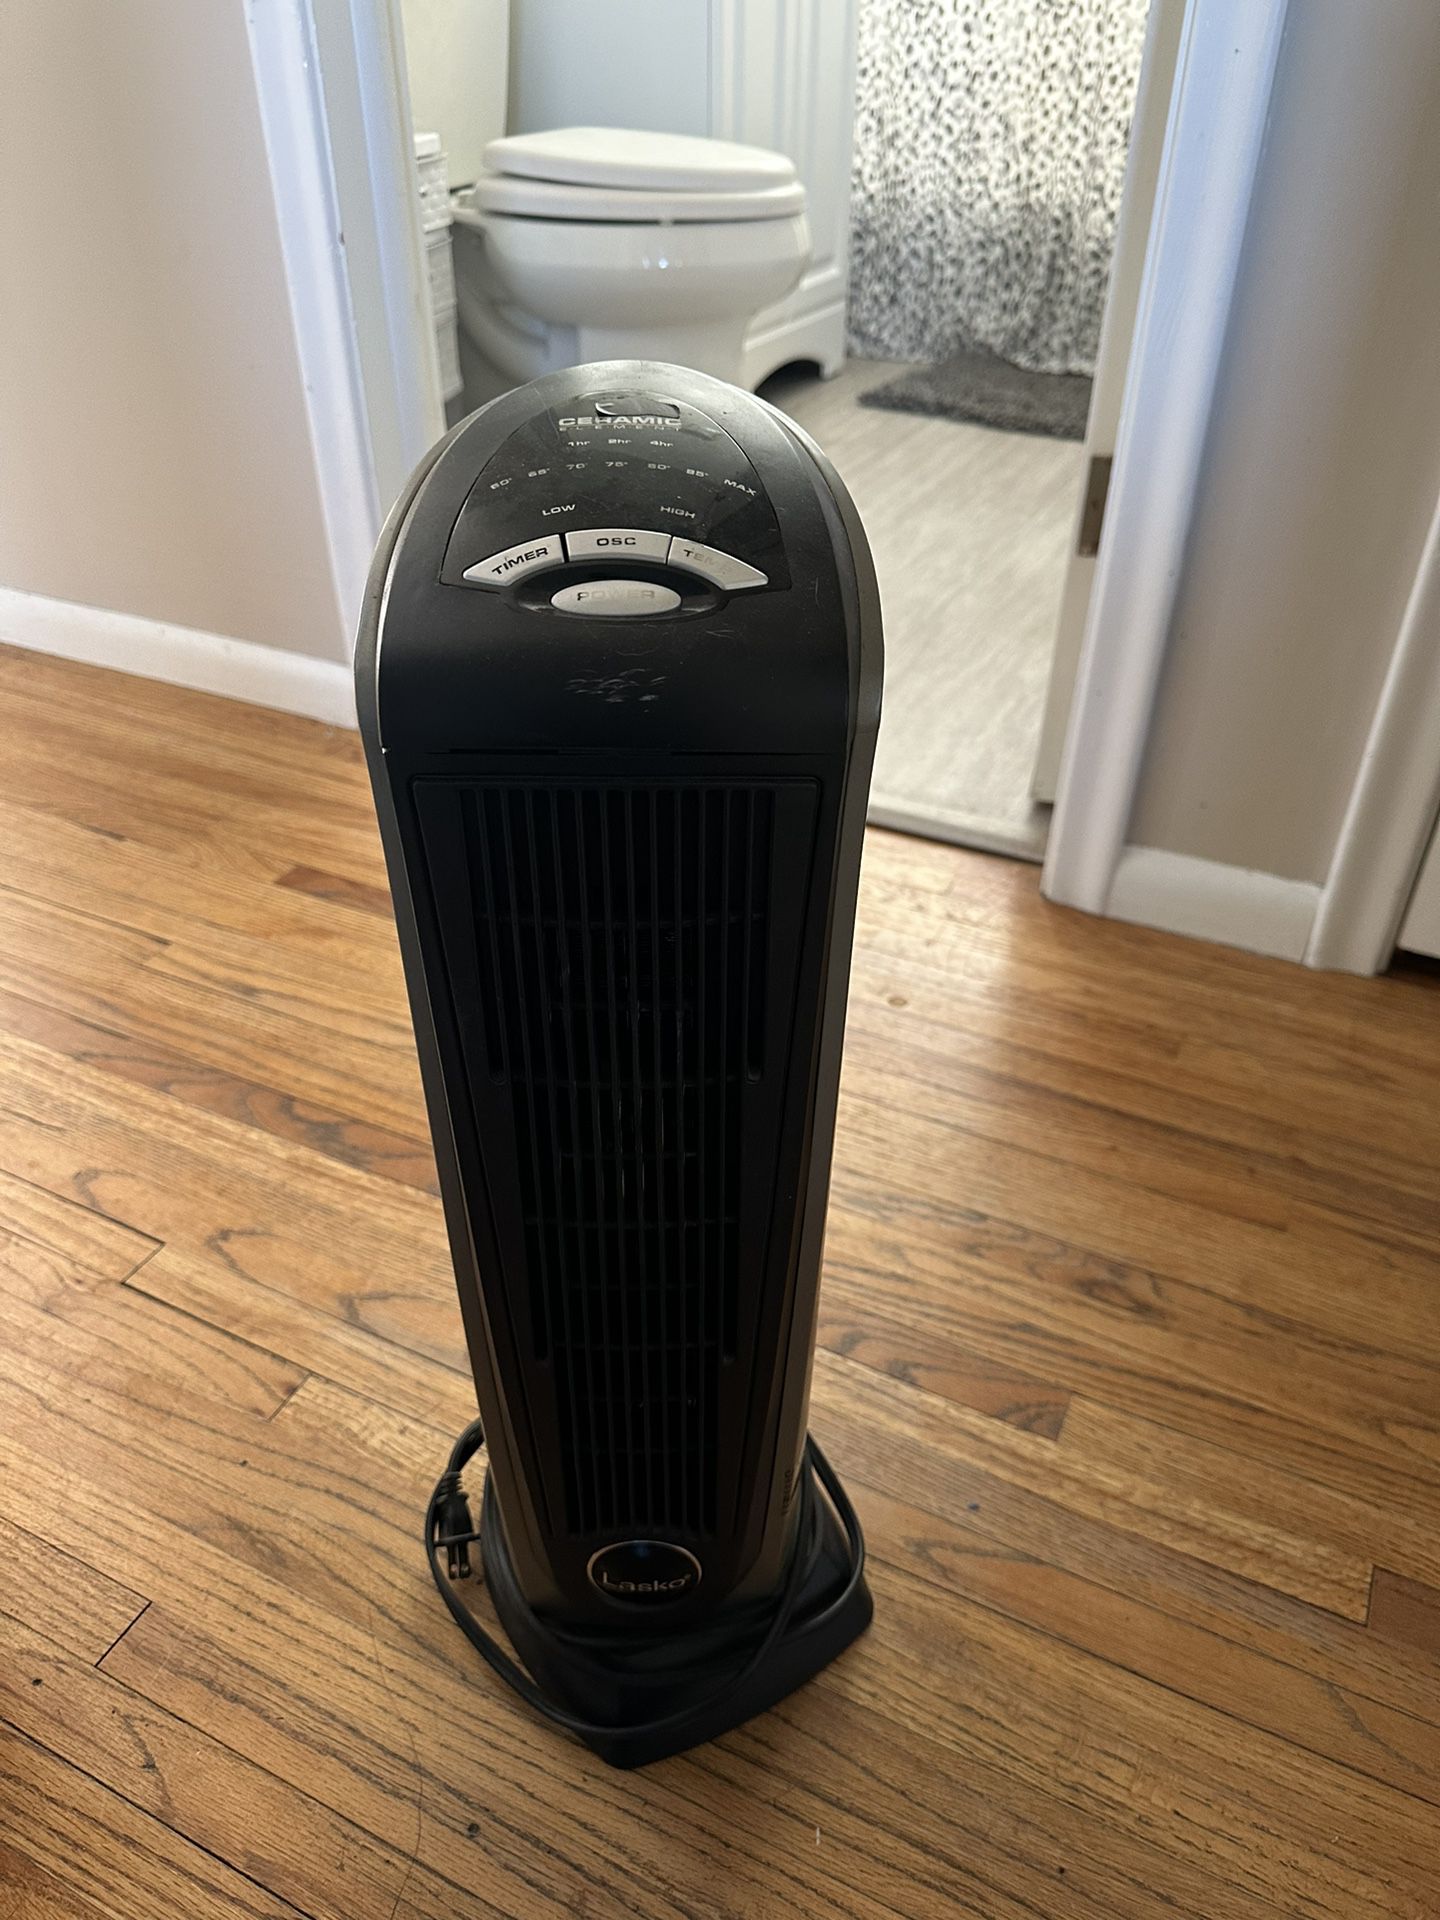 Lasko CT22(contact info removed)W Electric Oscillating Ceramic Tower Space Heater with Remote, Black